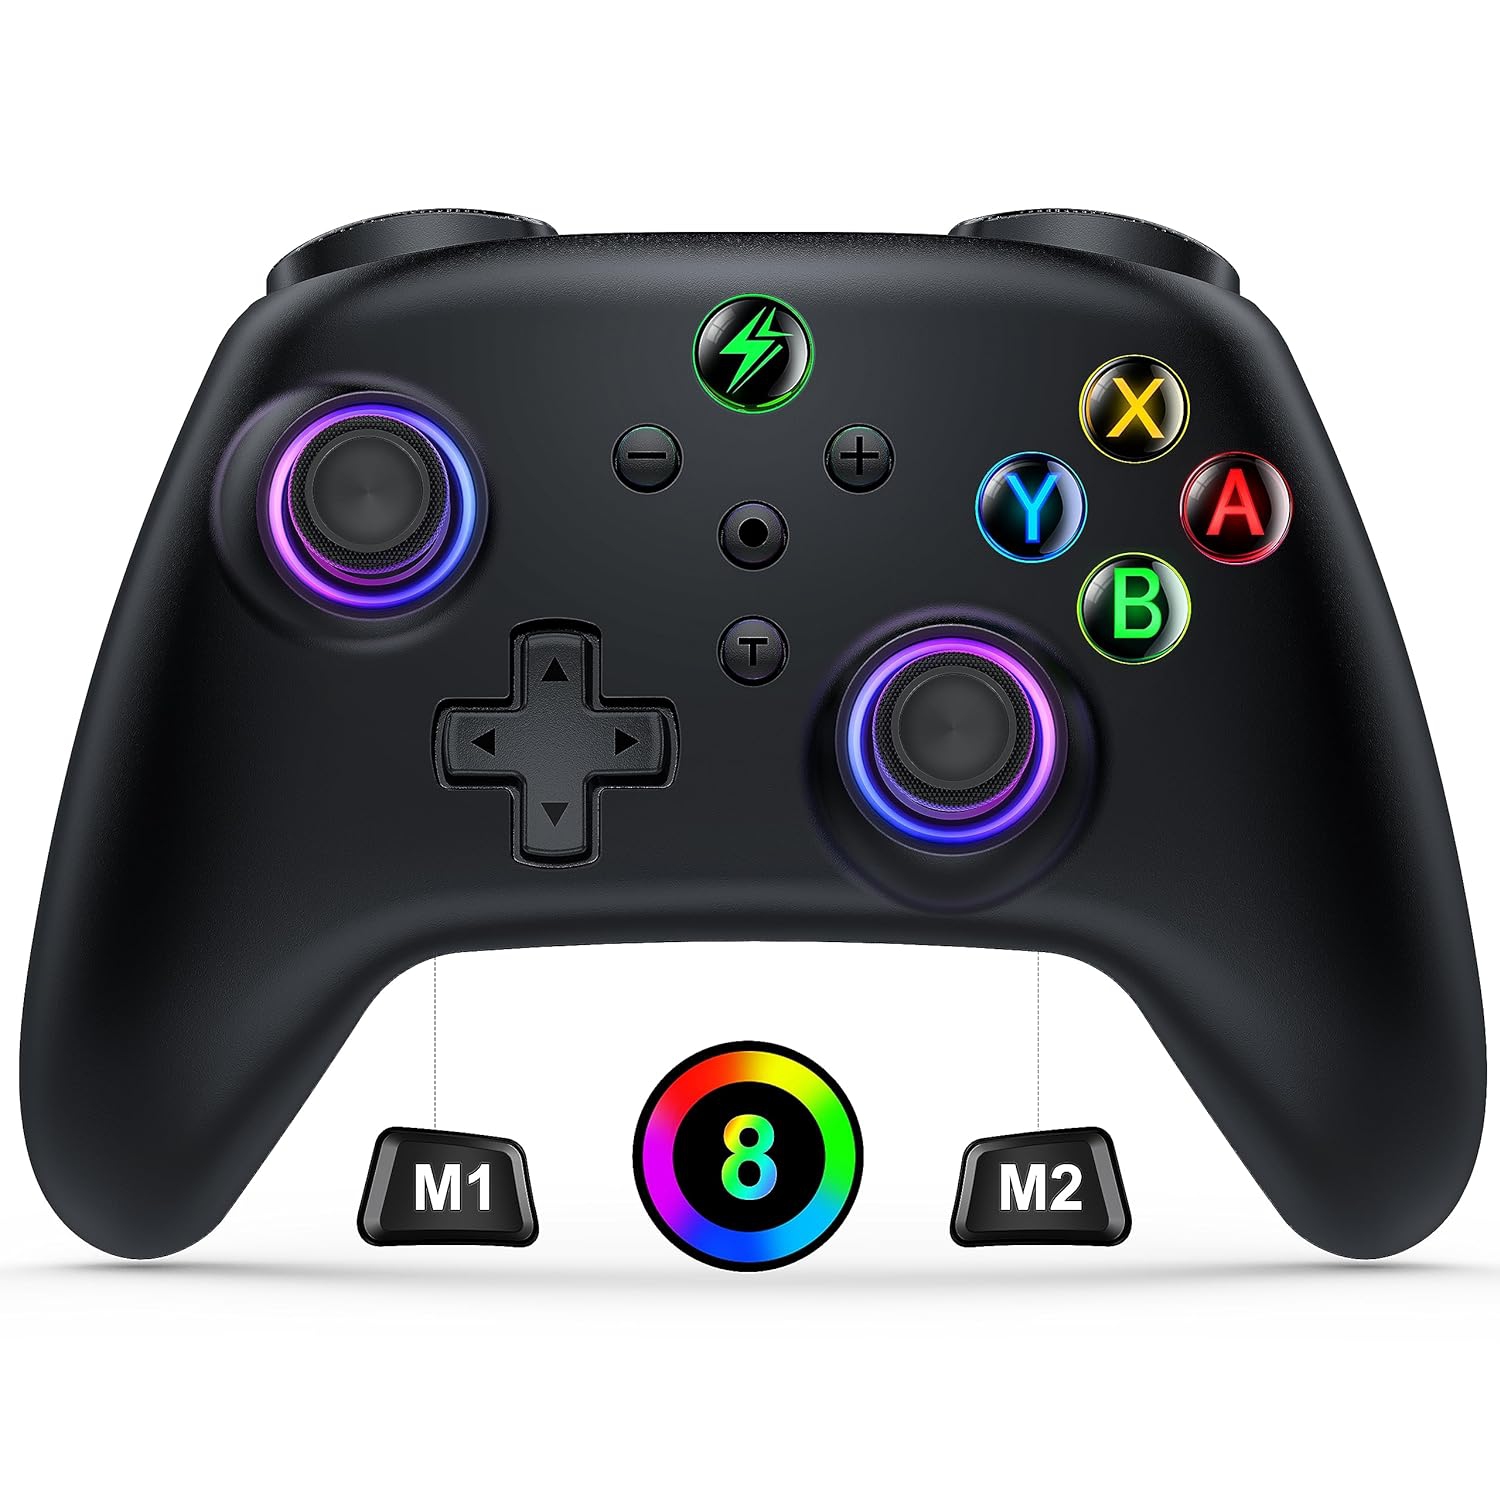 BoostBlossom Wireless Switch Controller compatible with Nintendo Switch, Switch Lite, and OLED, featuring LED Switch Pro Controller support for iOS, Android, and wired PC gaming.